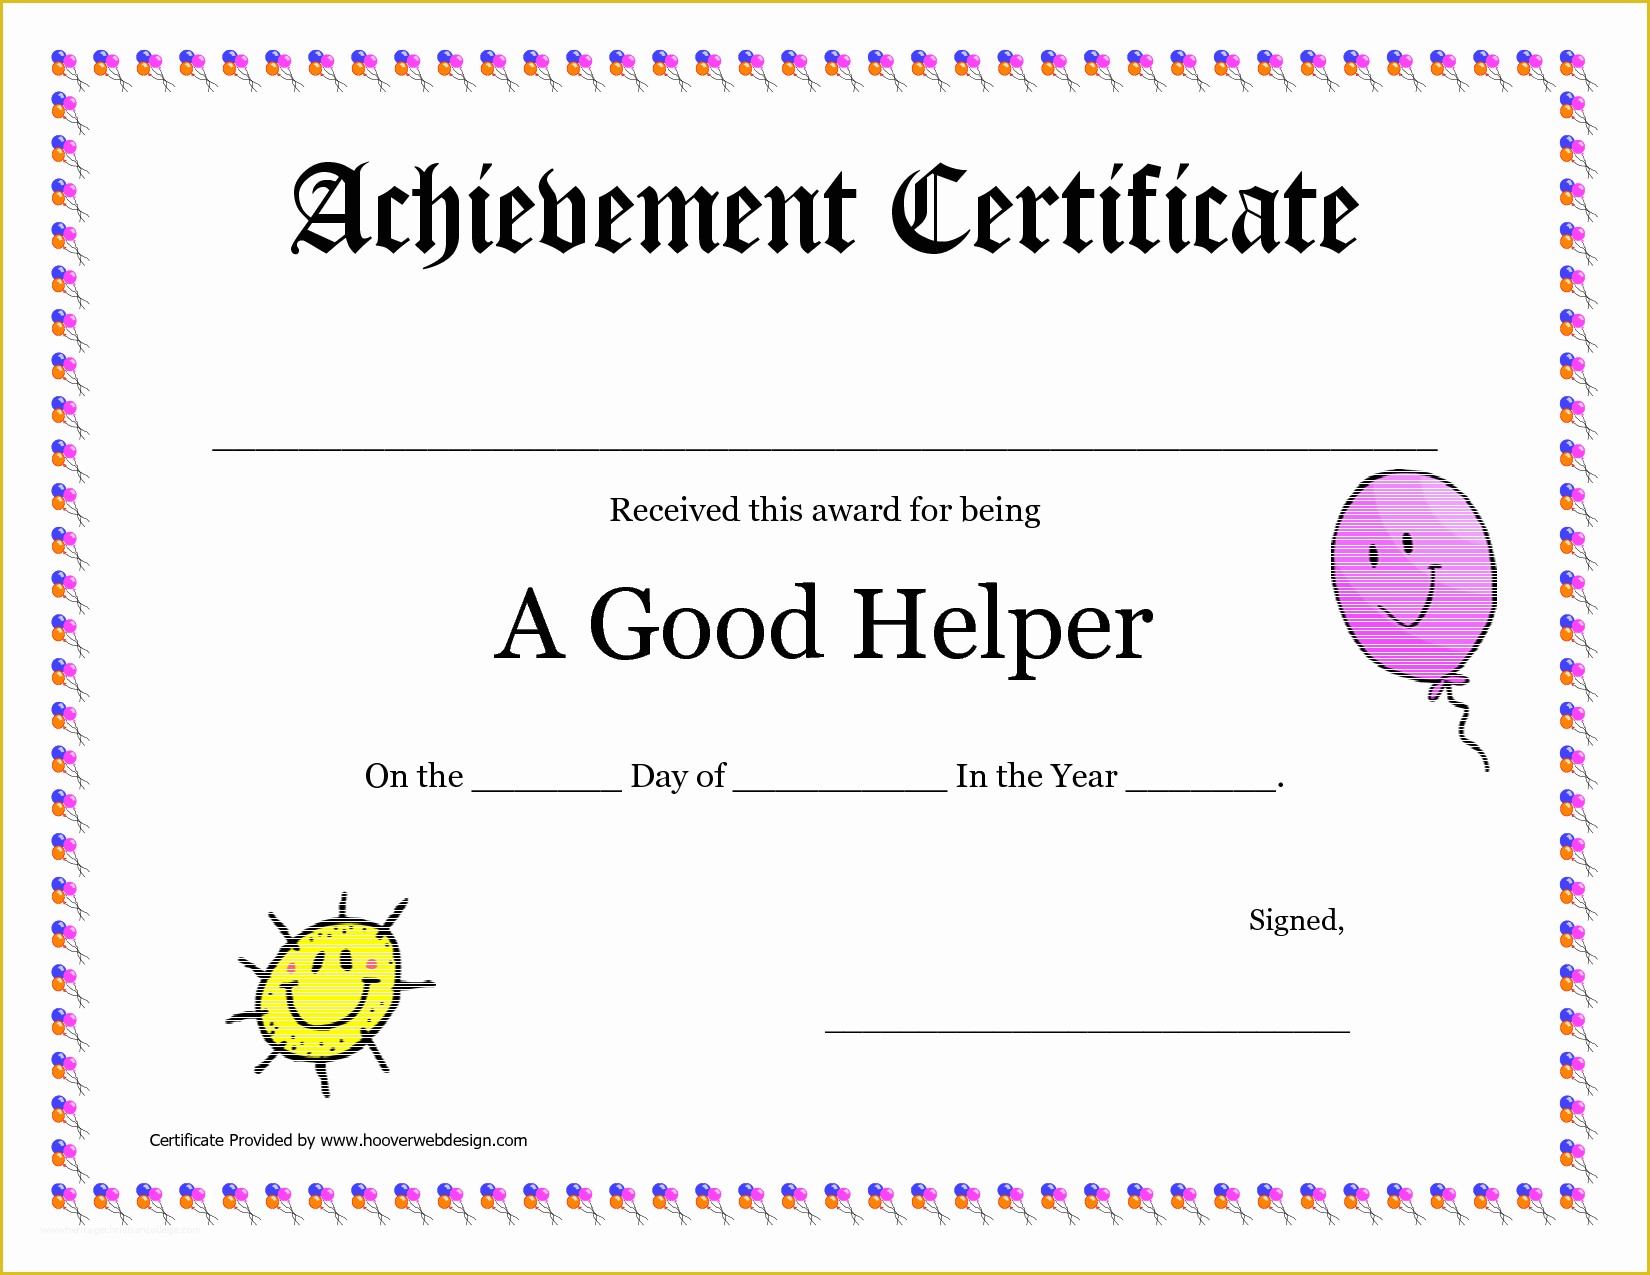 Free Certificate Templates for Students Of Printable Award Certificates for Teachers